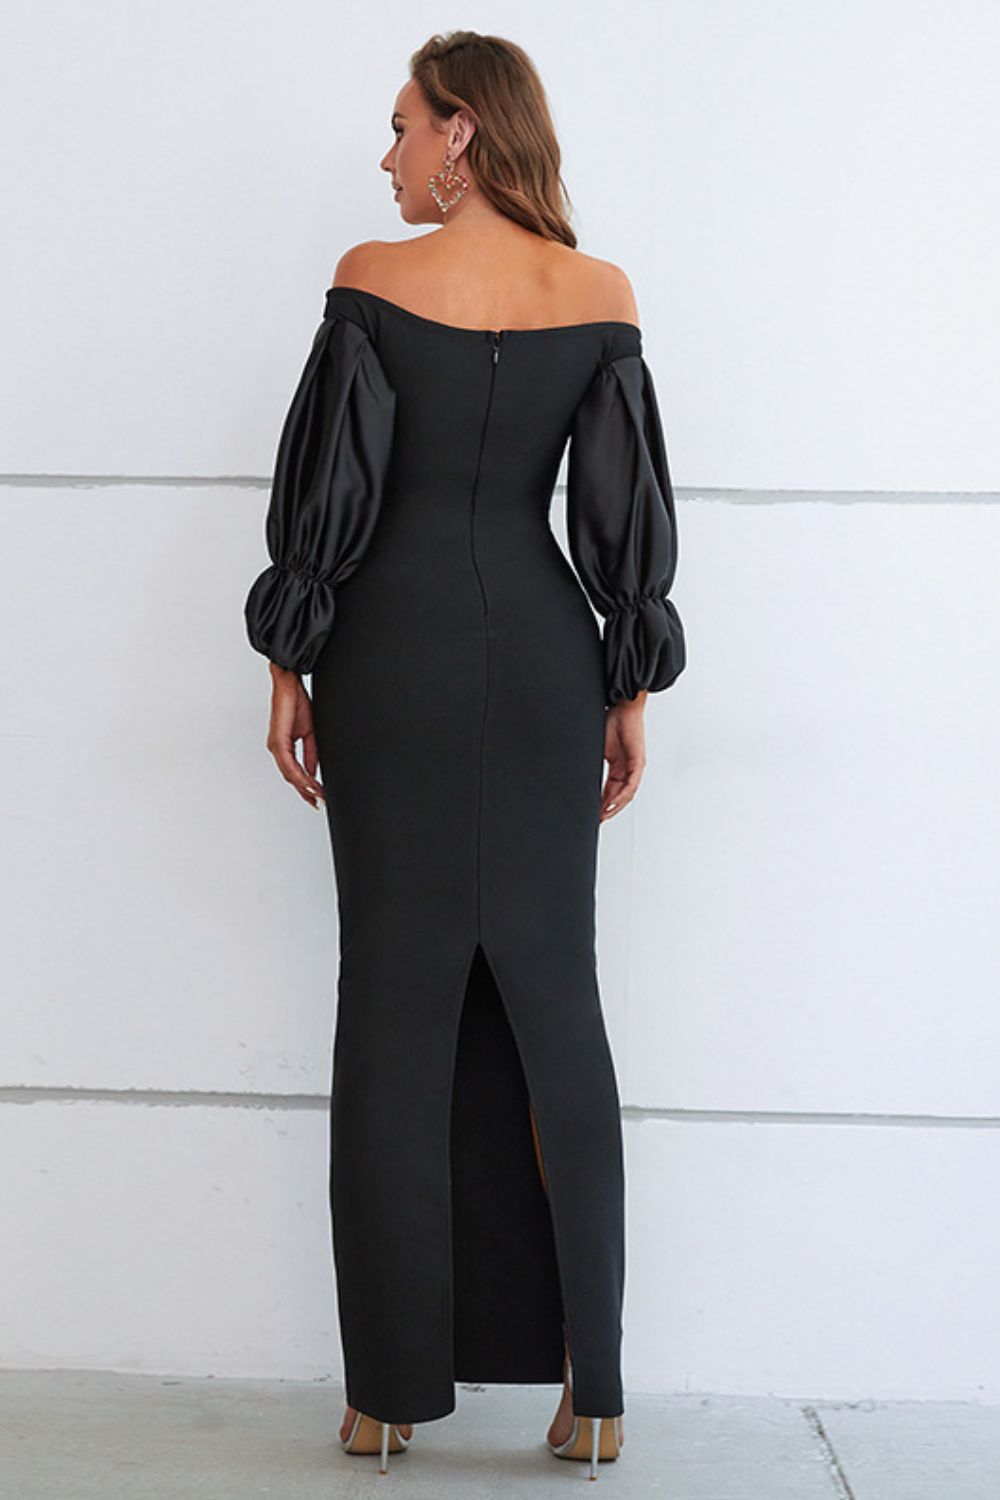 Billow Talk Wiggle Dress with Off-Shoulder Bubble Sleeves in Black